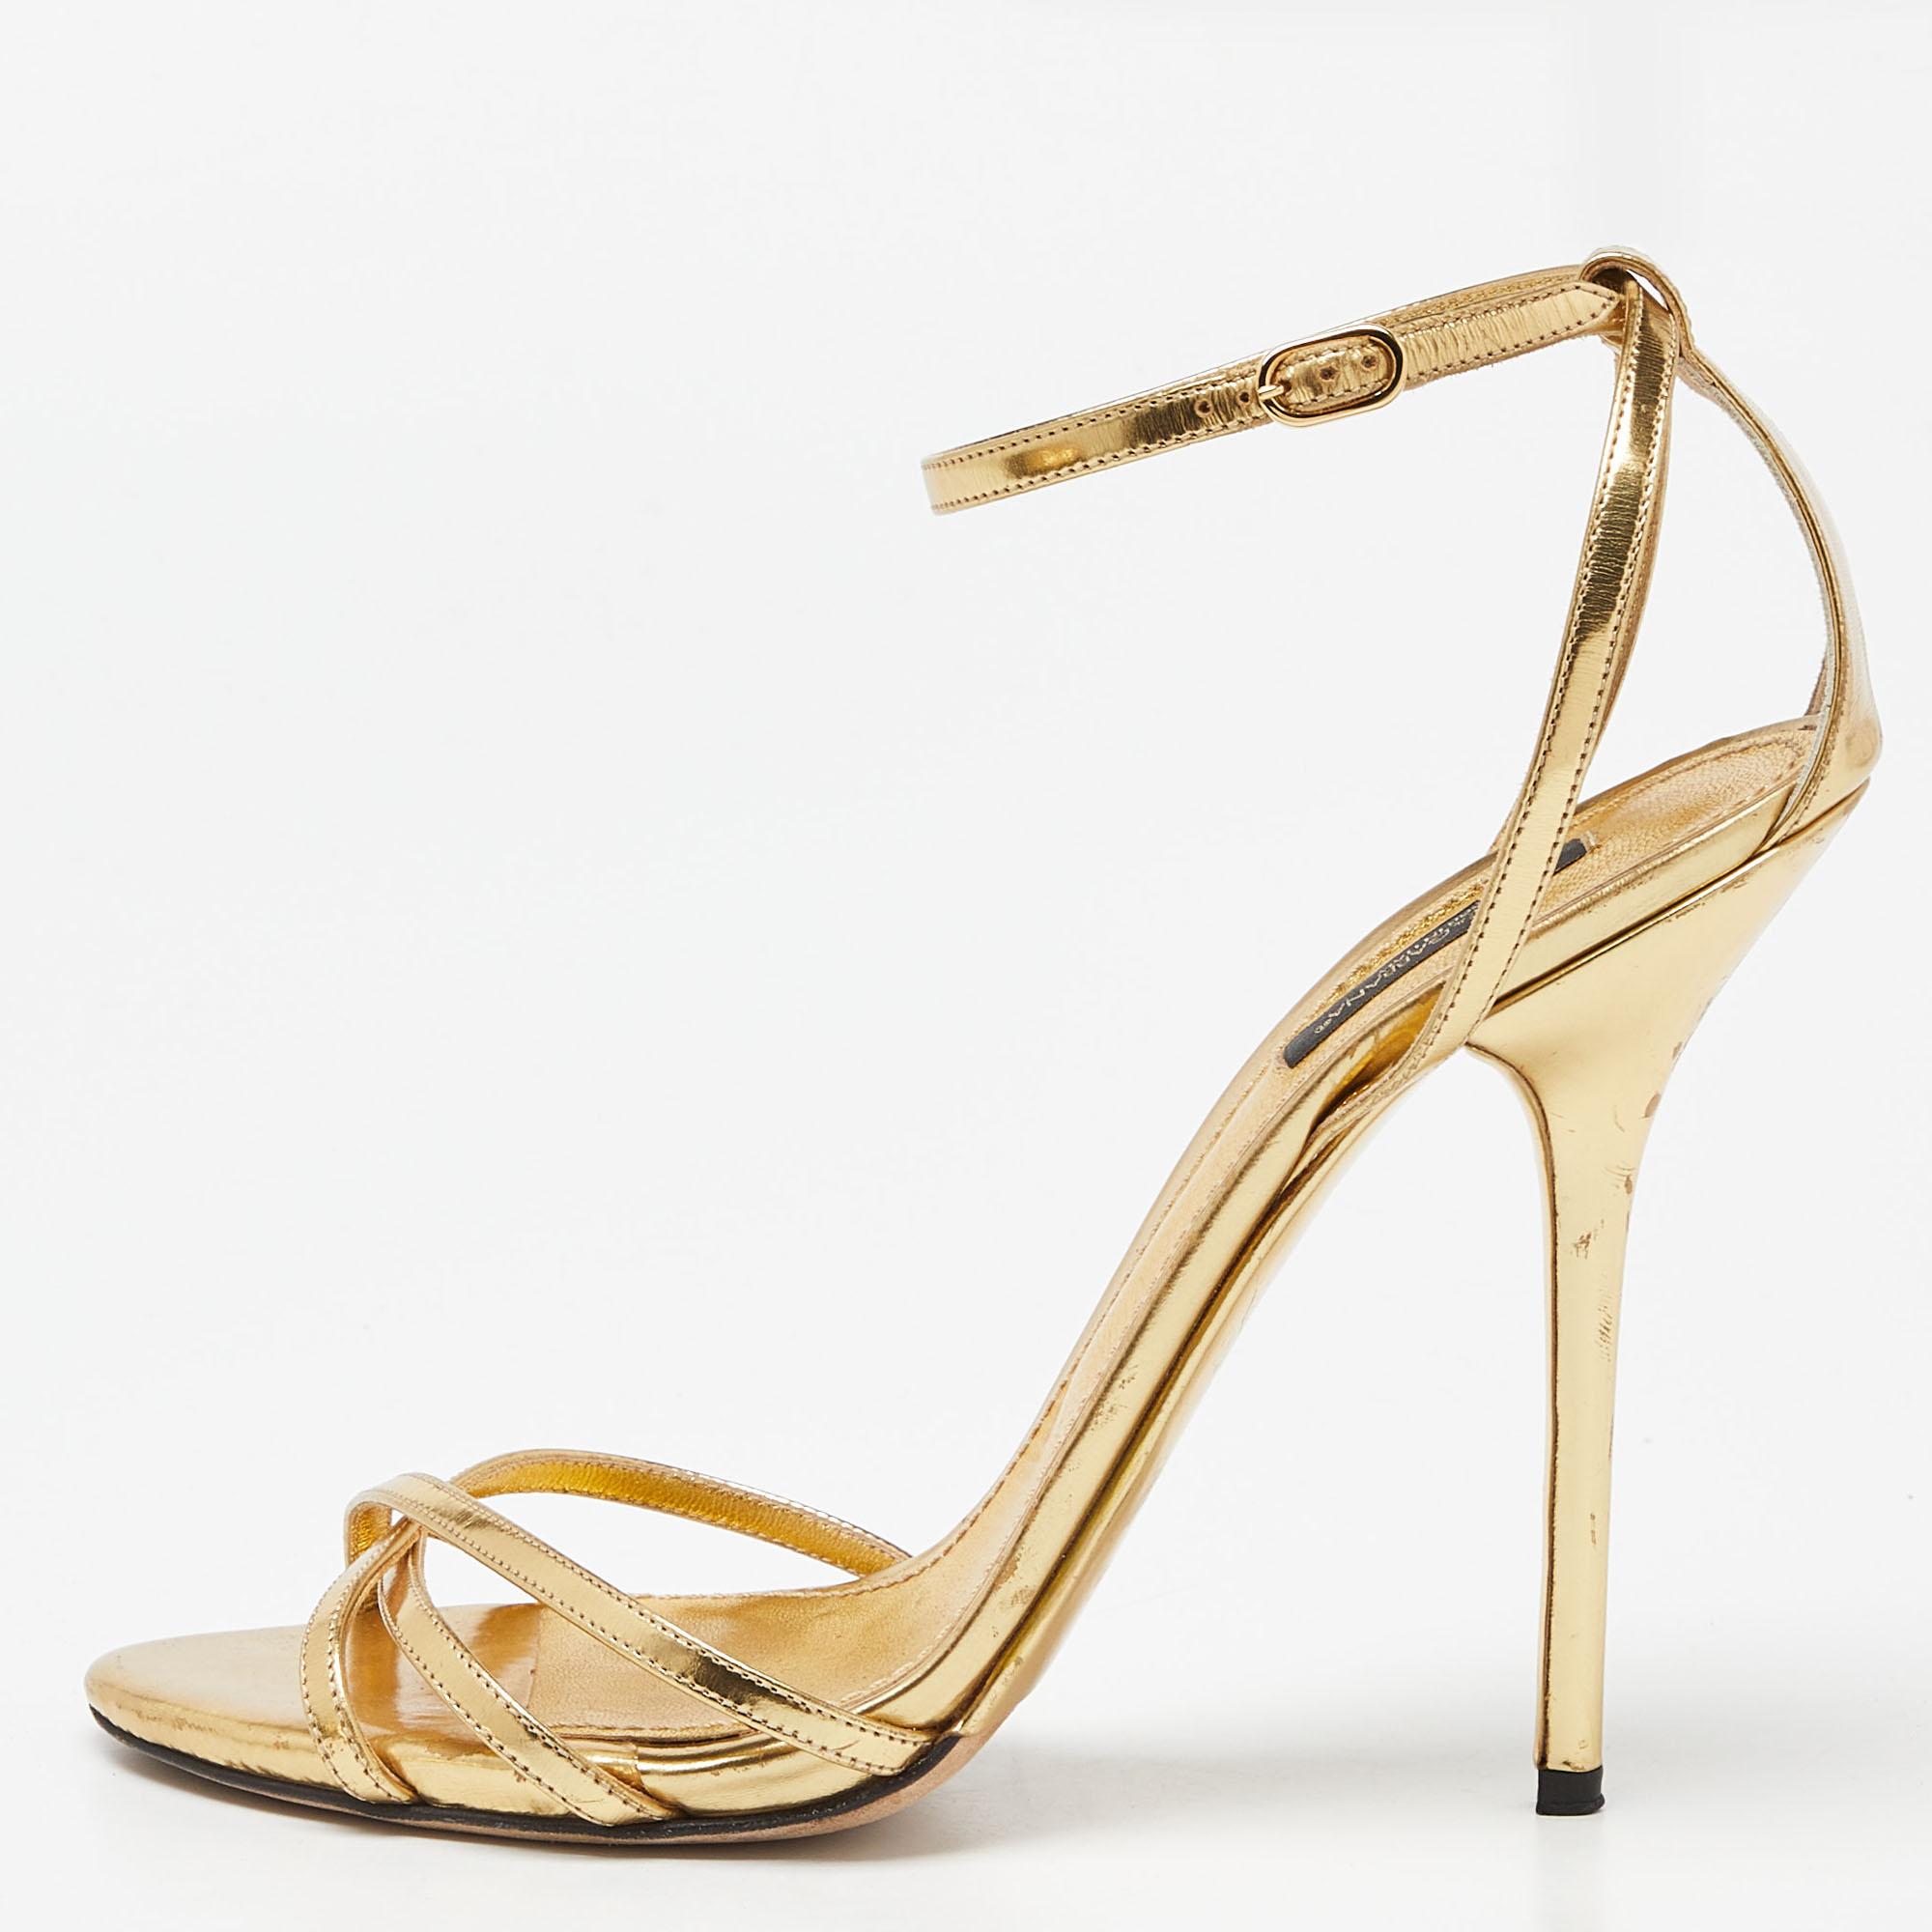 Dolce & gabbana gold leather ankle strap sandals size 41